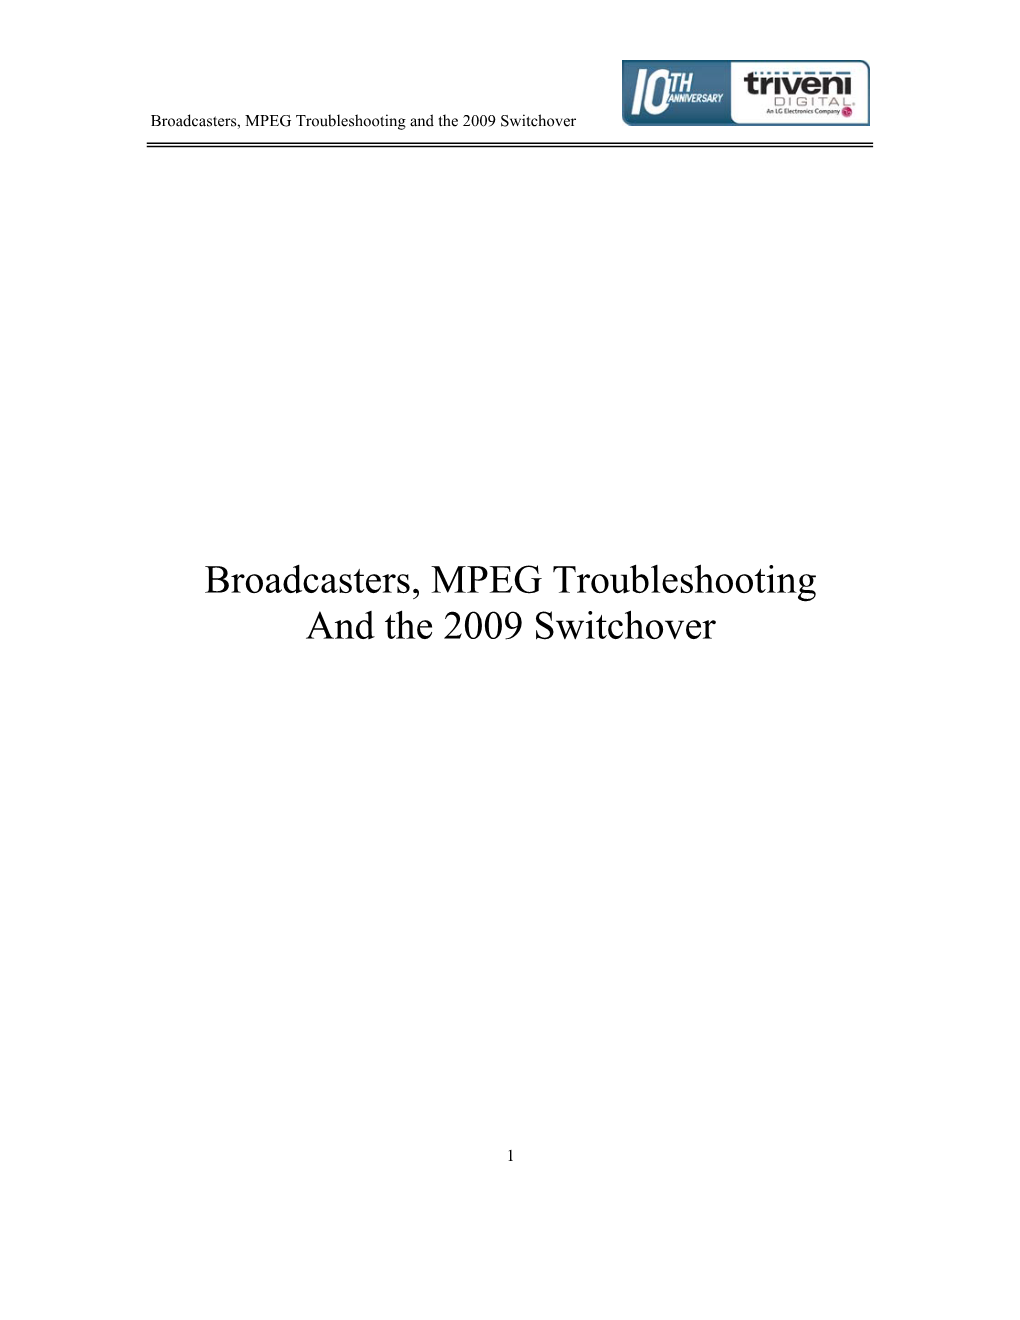 Broadcasters, MPEG Troubleshooting and the 2009 Switchover